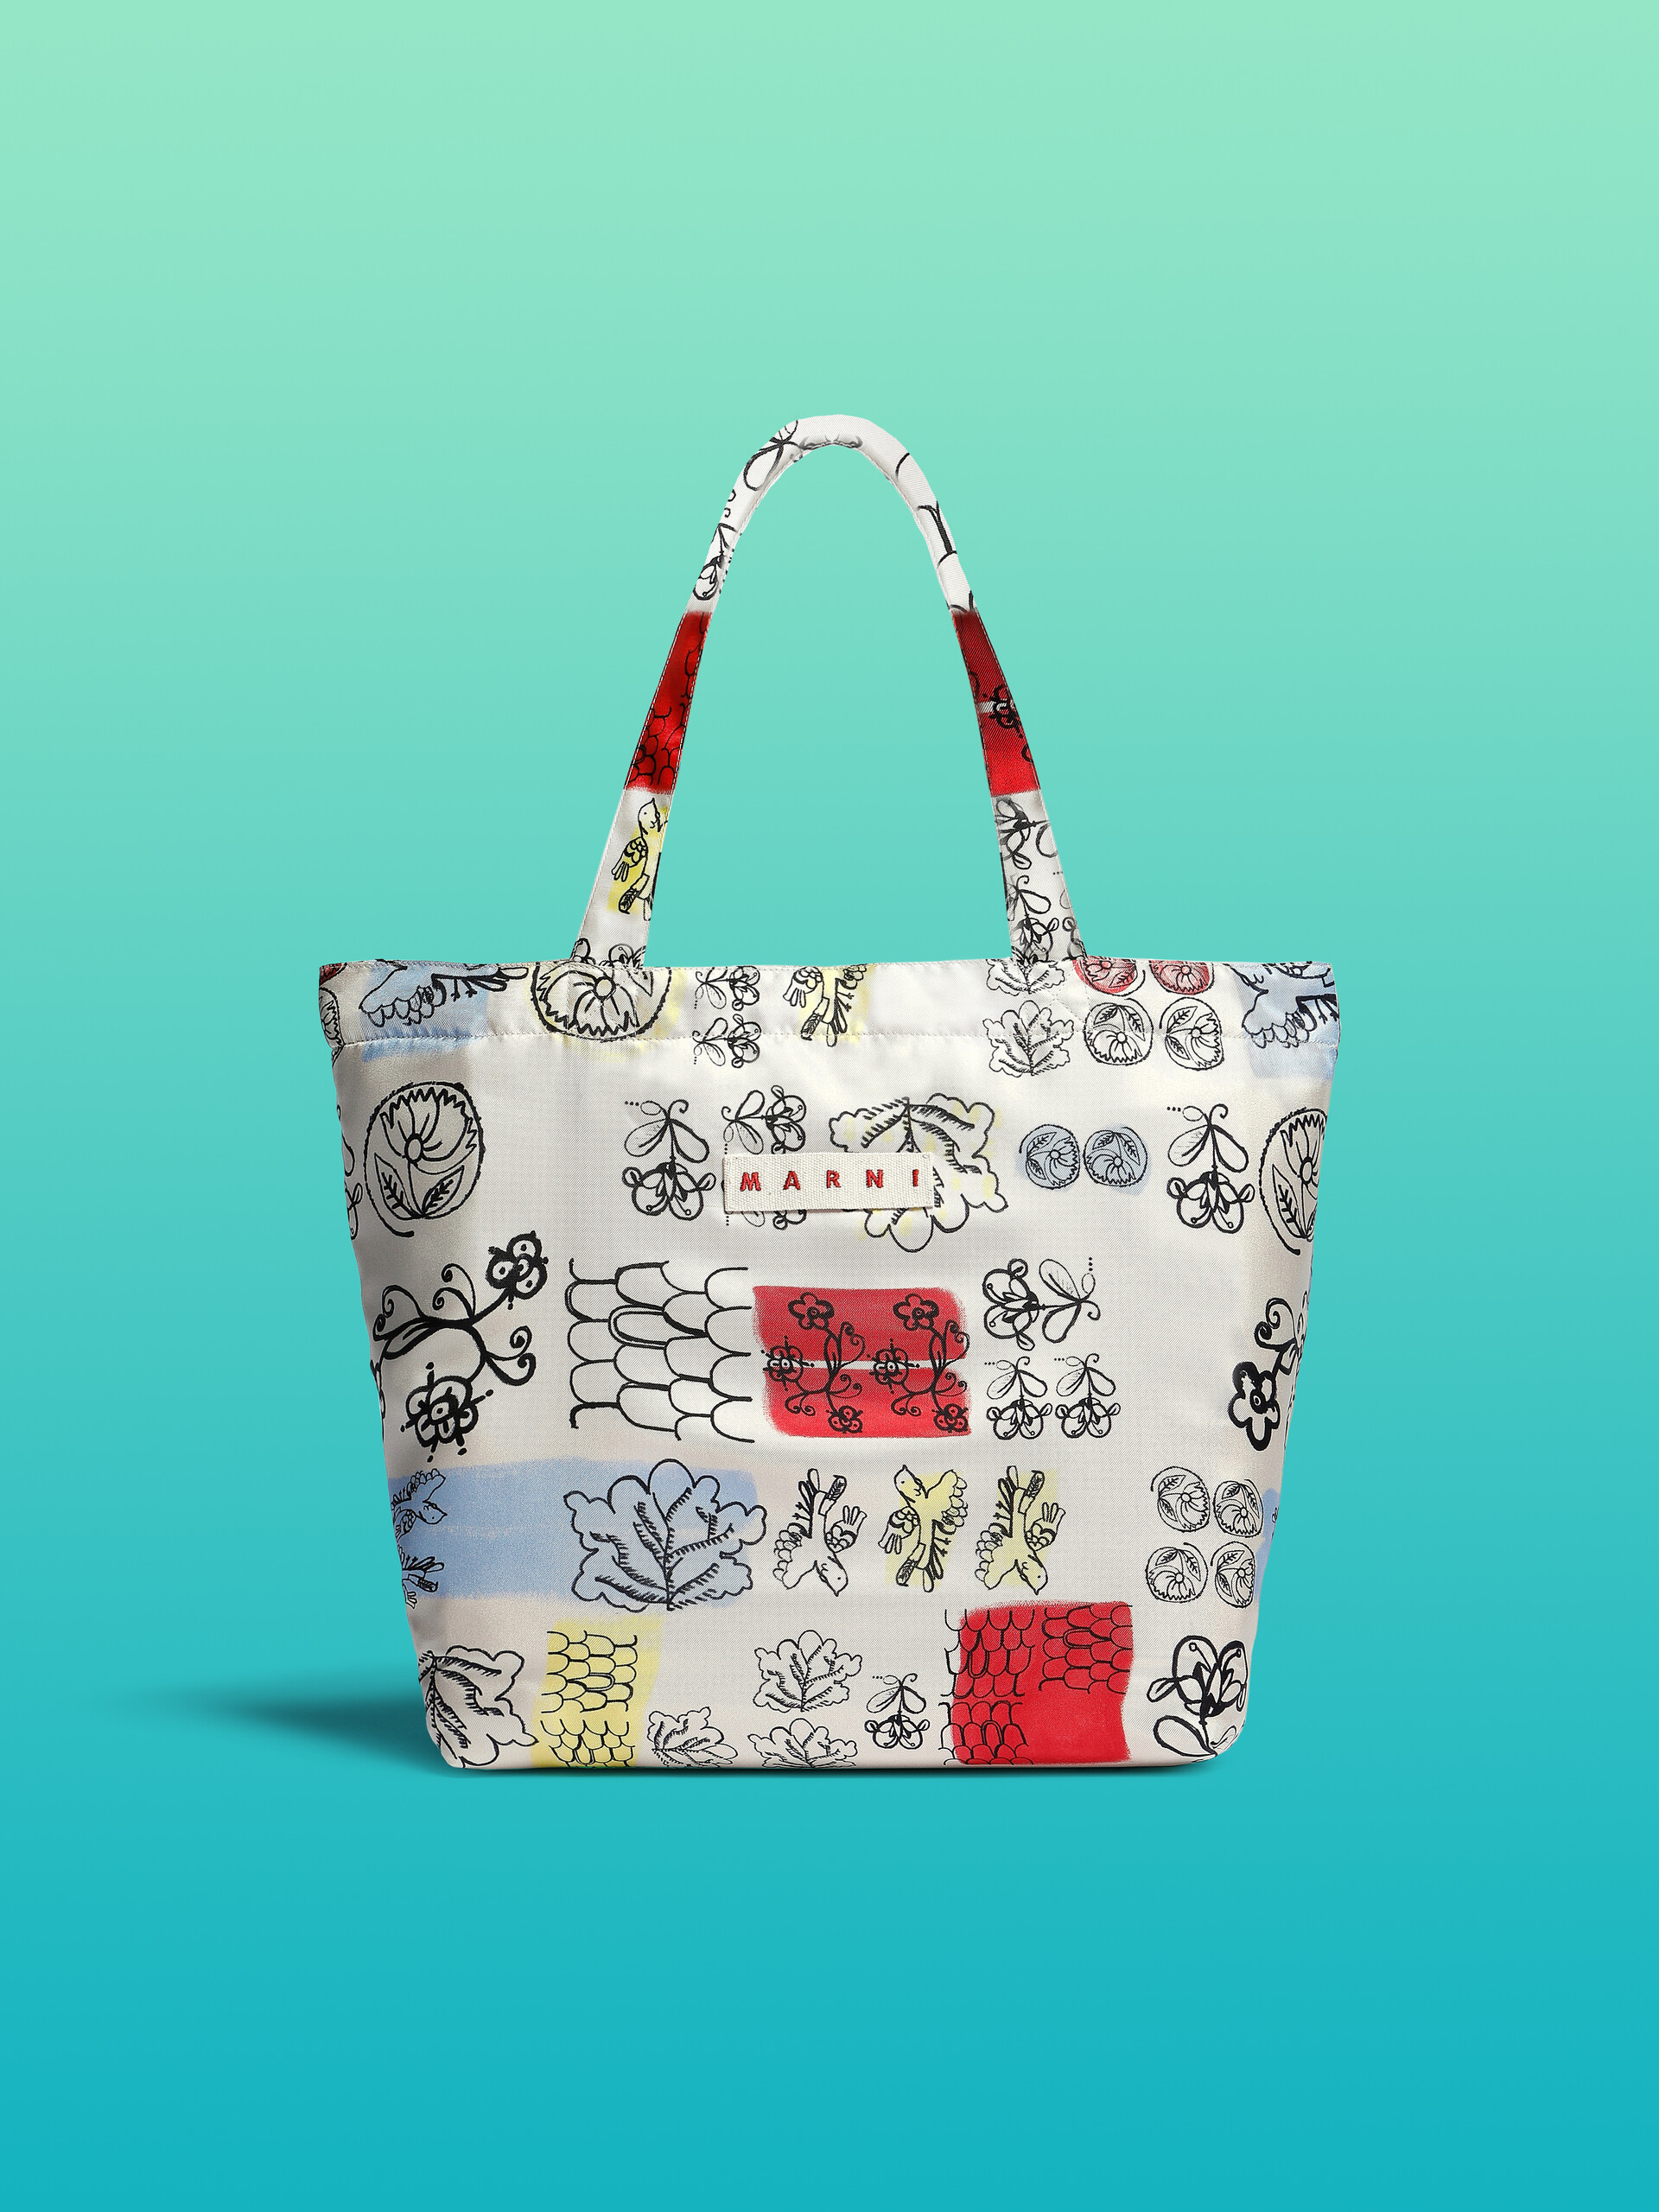 Ivory white silk tote bag with archival graphic print - Bags - Image 1